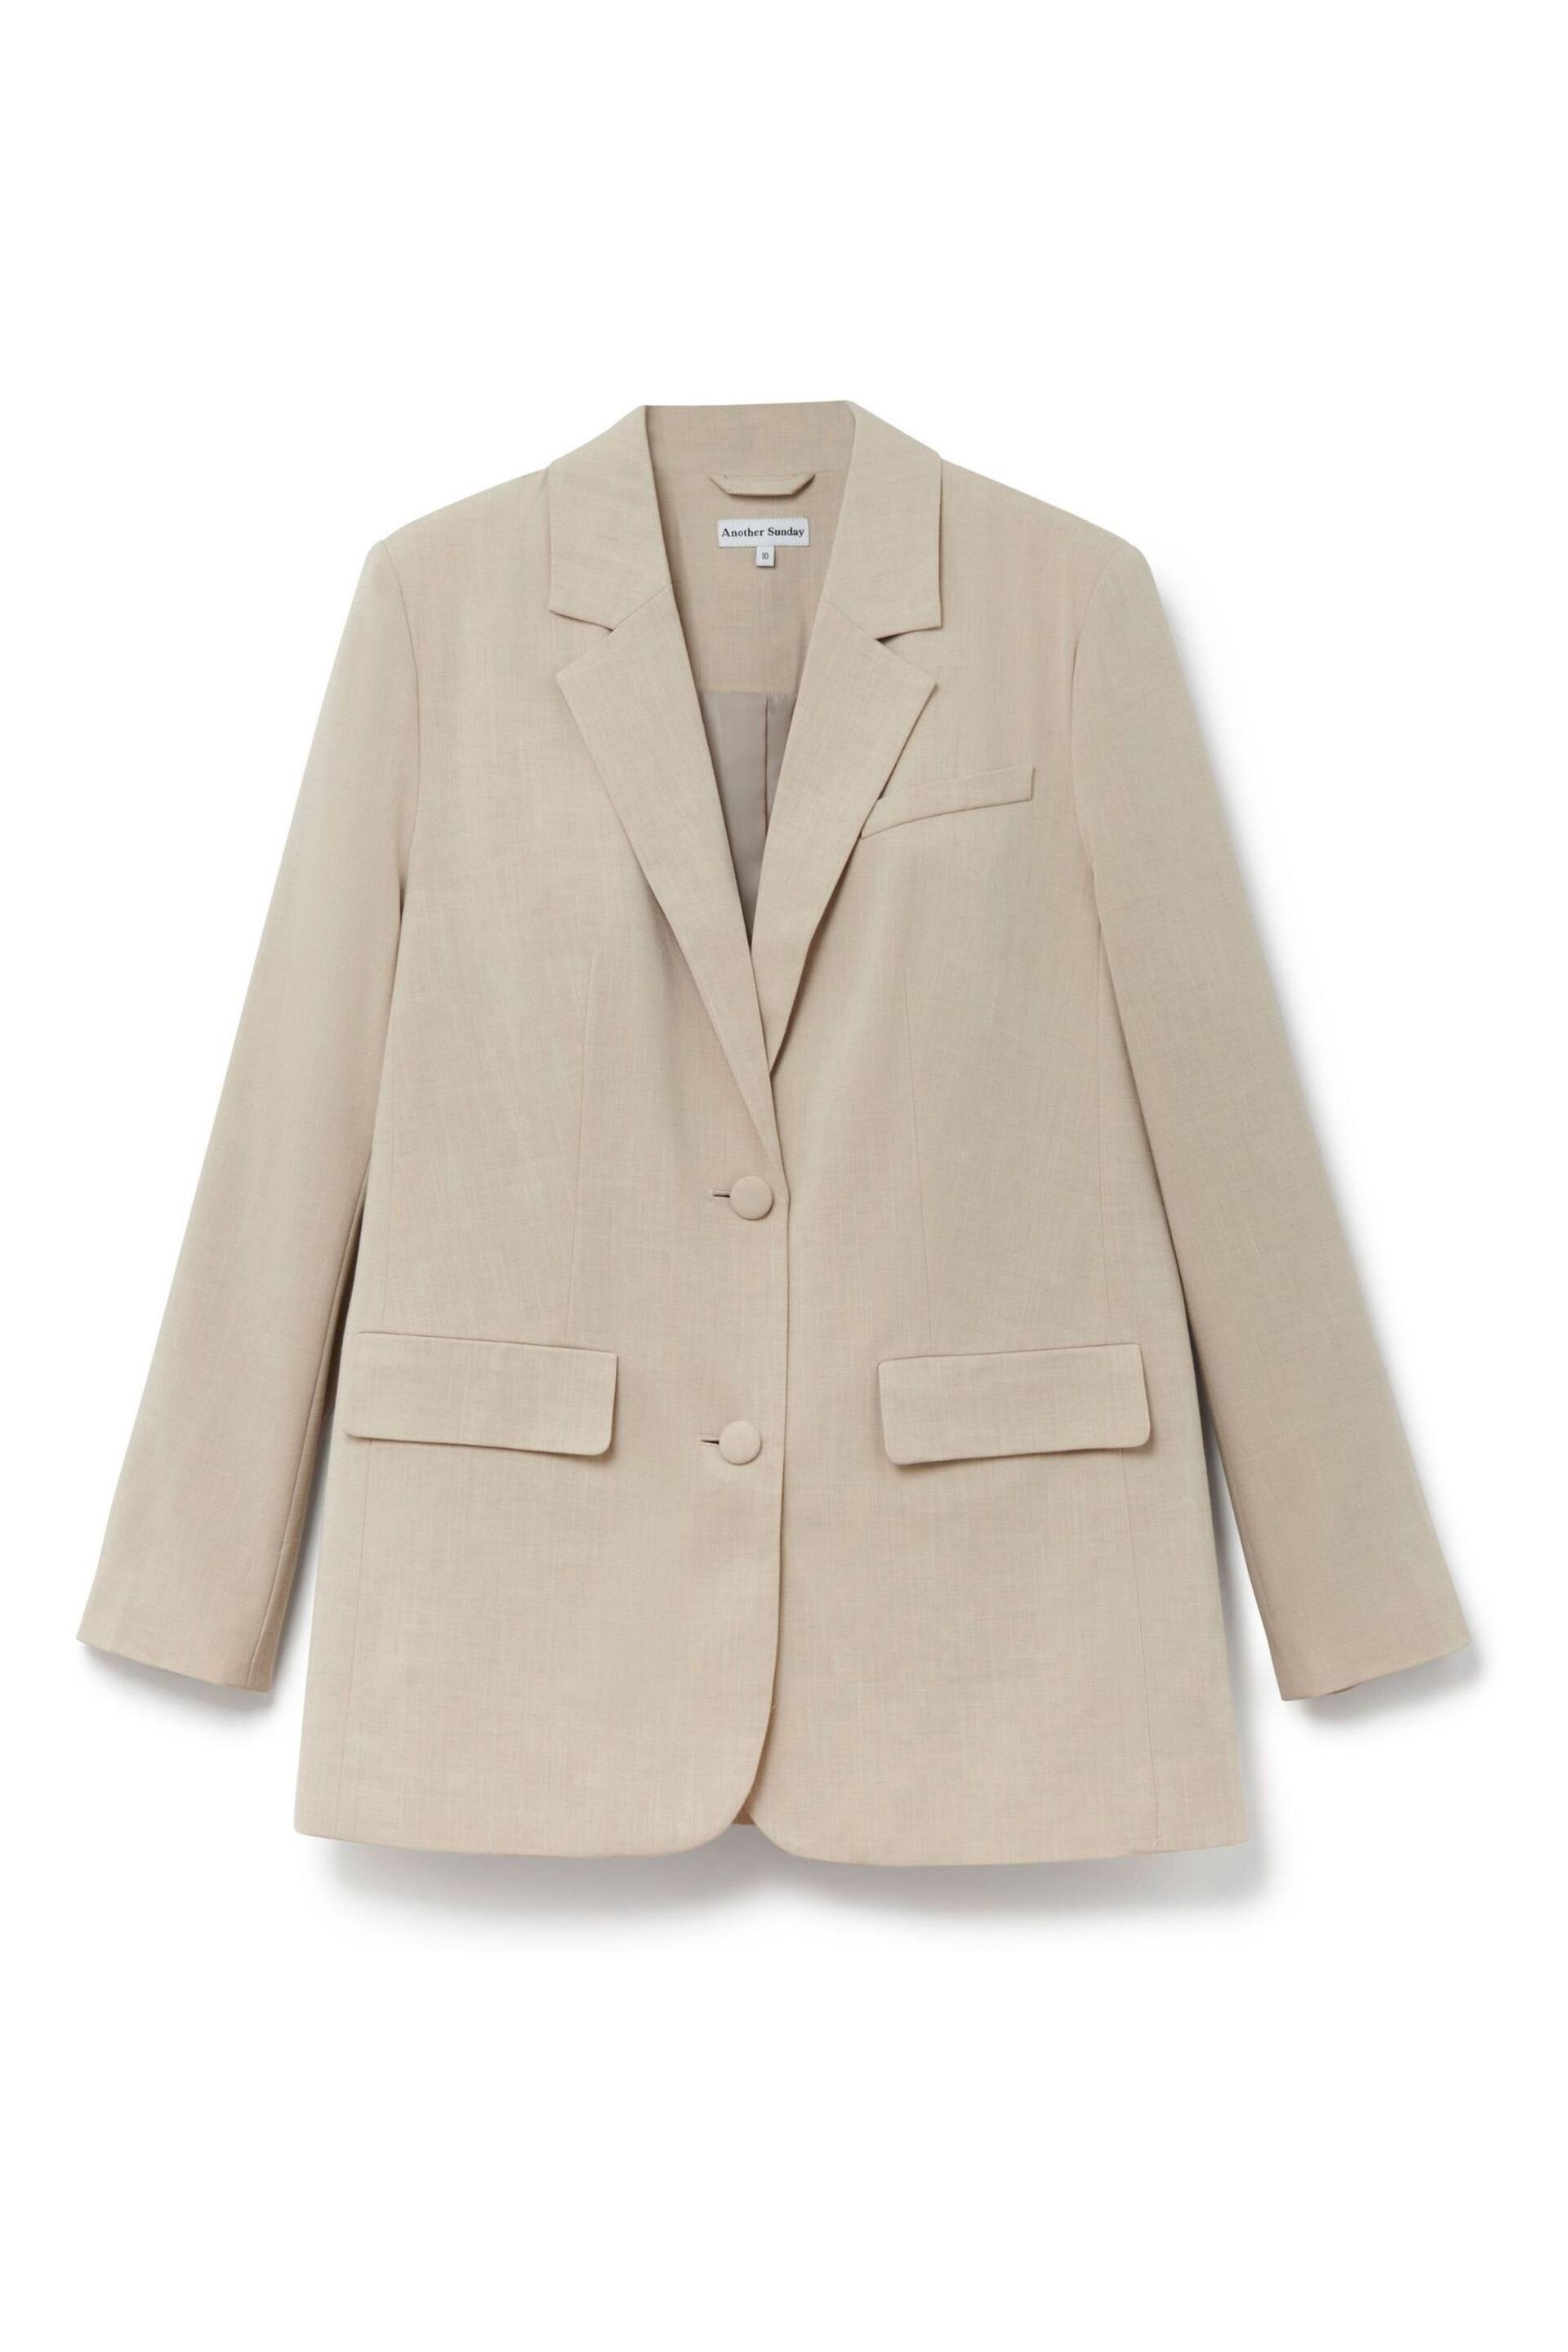 Another Sunday Oversized Linen Look Blazer In Stone - Image 4 of 6